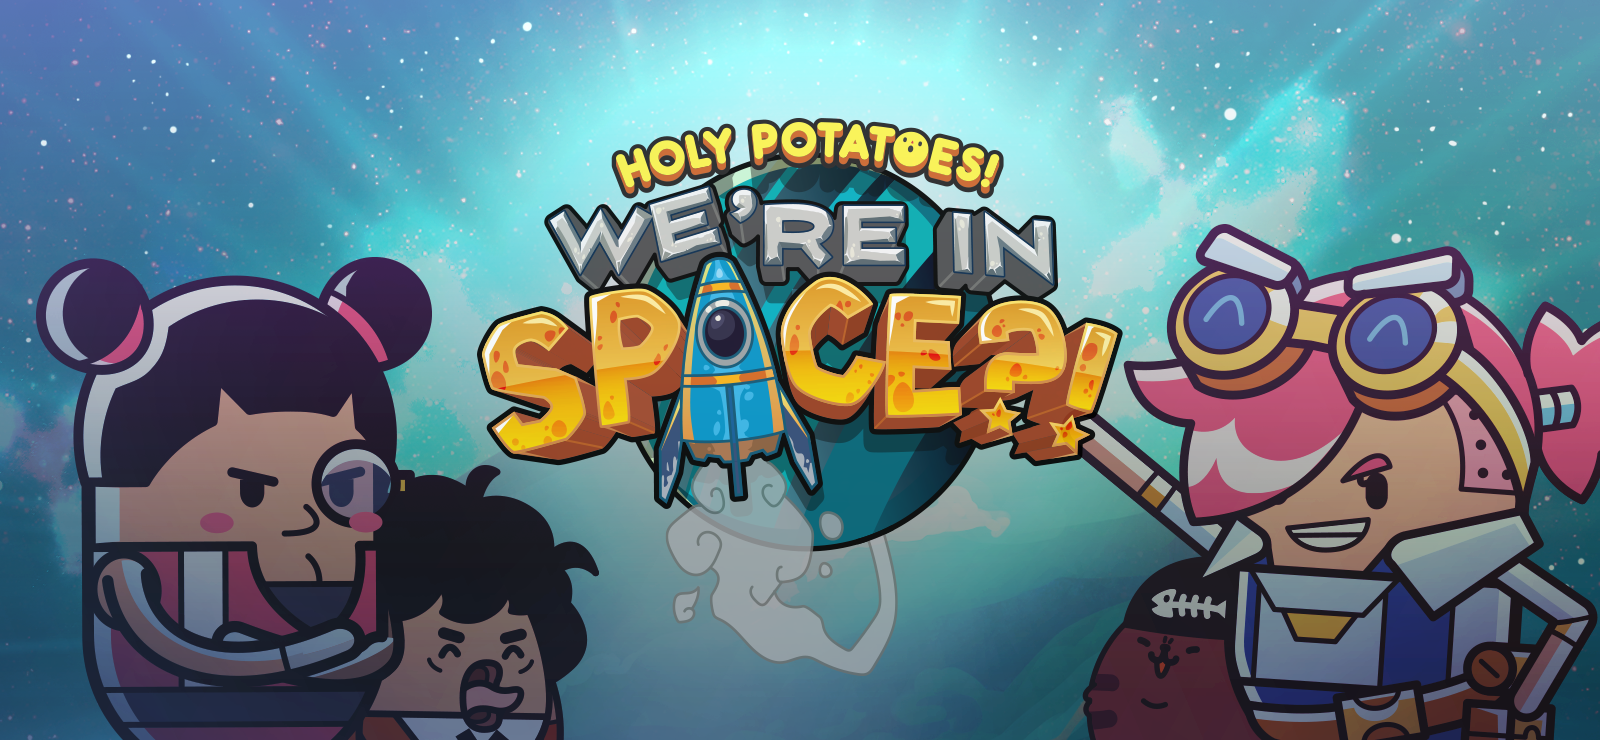 Holy Potatoes! We're In Space?!